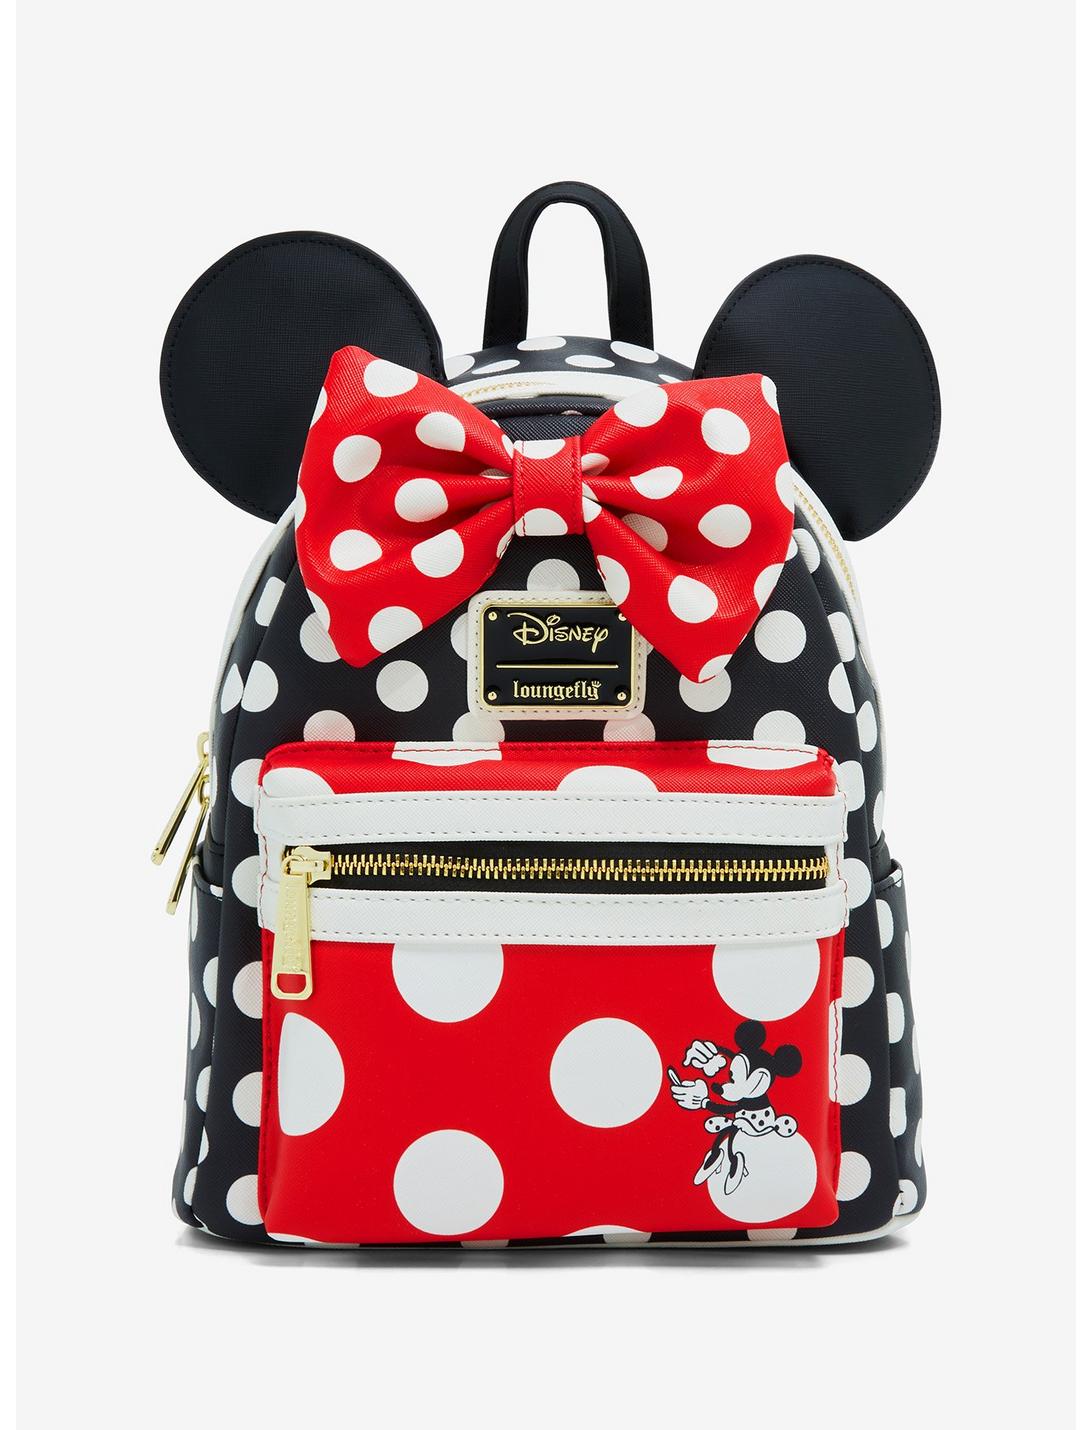 Loungefly Disney Minnie Mouse Black and Red Polka Dot Mini Backpack ...